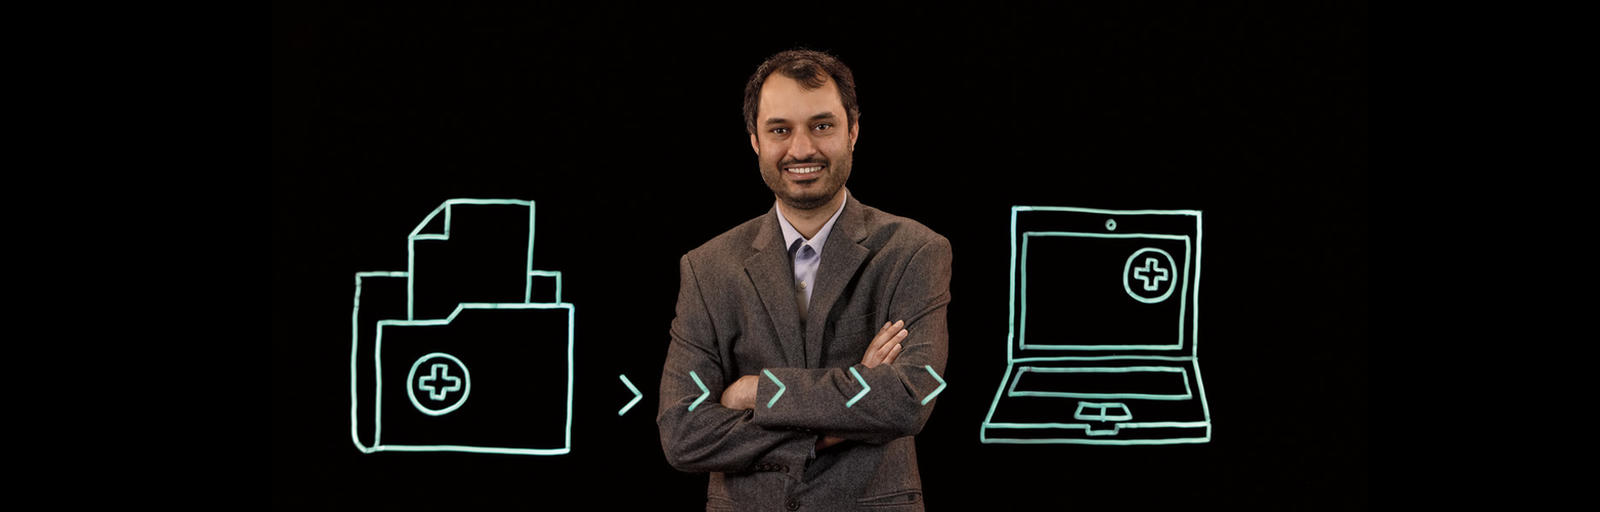 Kartik Ganju stands behind an illustrations of documents being transferred to a computer